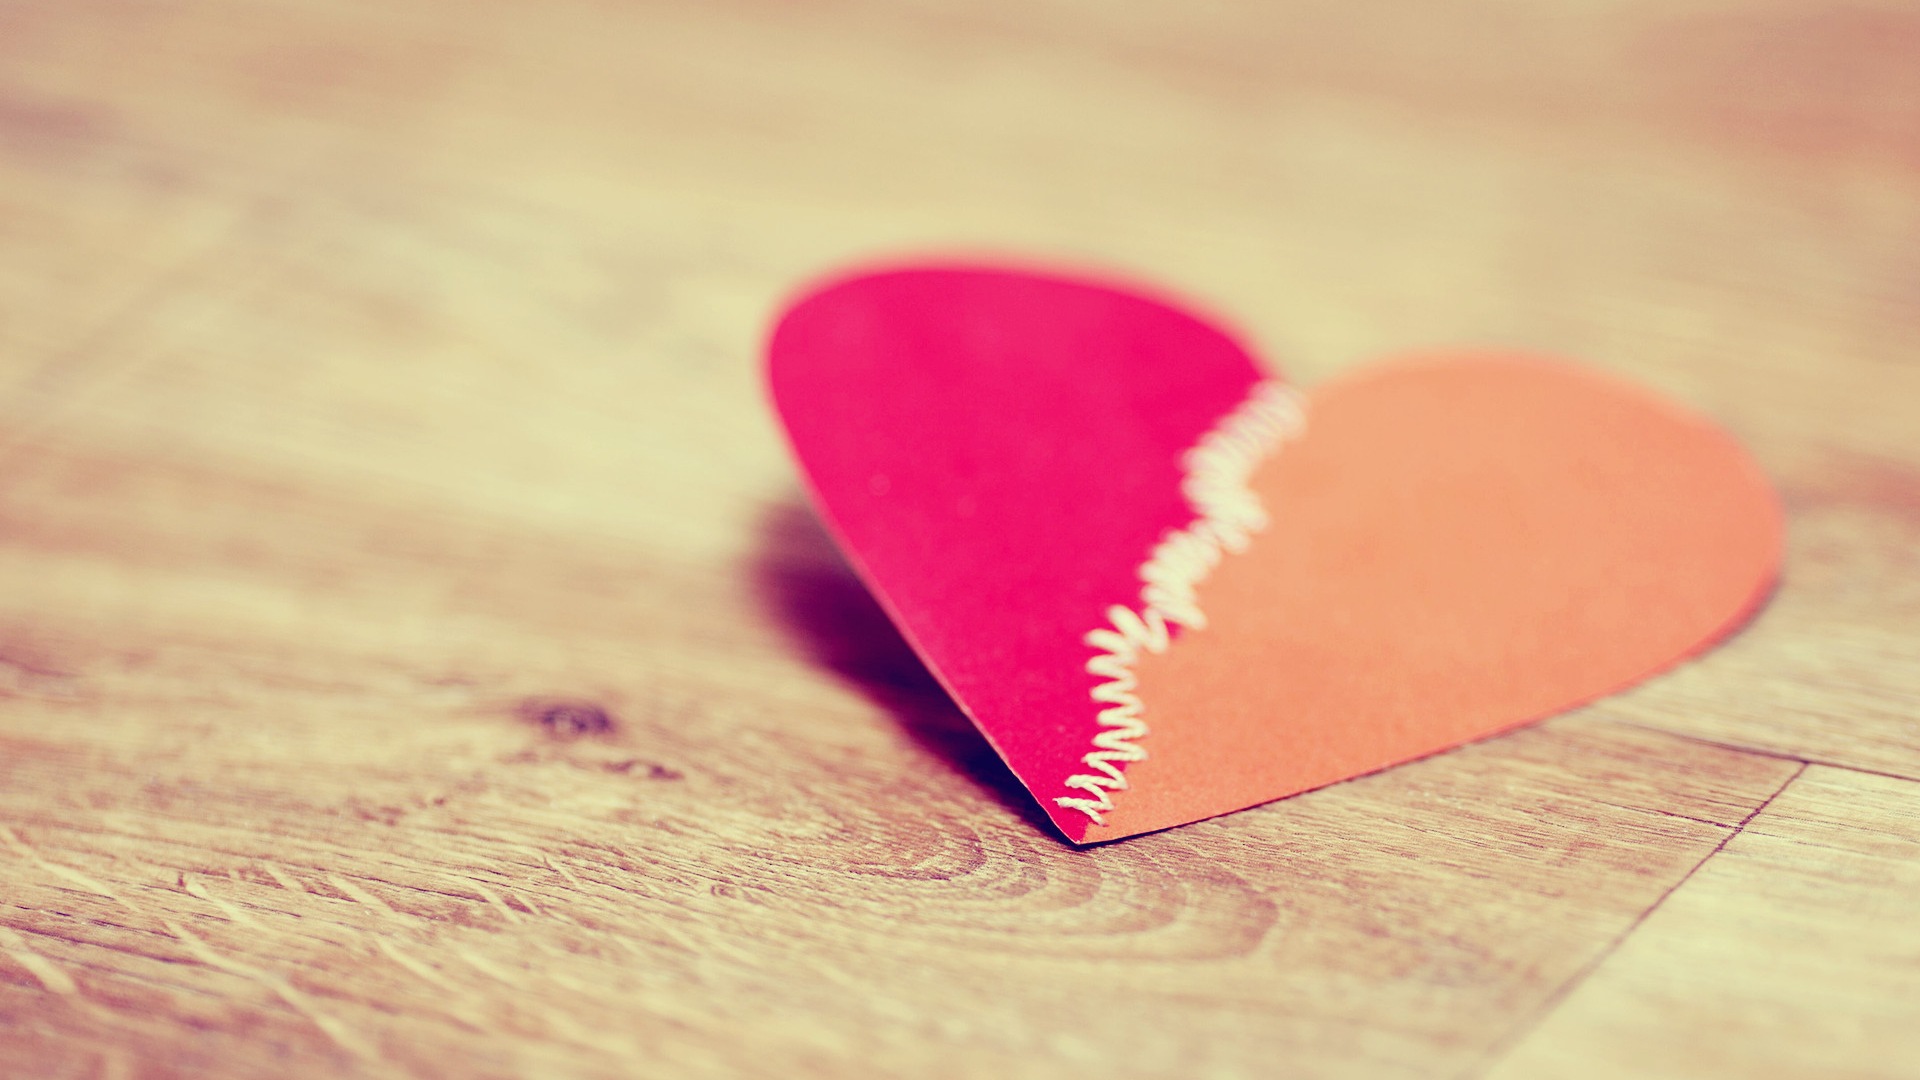 The theme of love, creative heart-shaped HD wallpapers #5 - 1920x1080